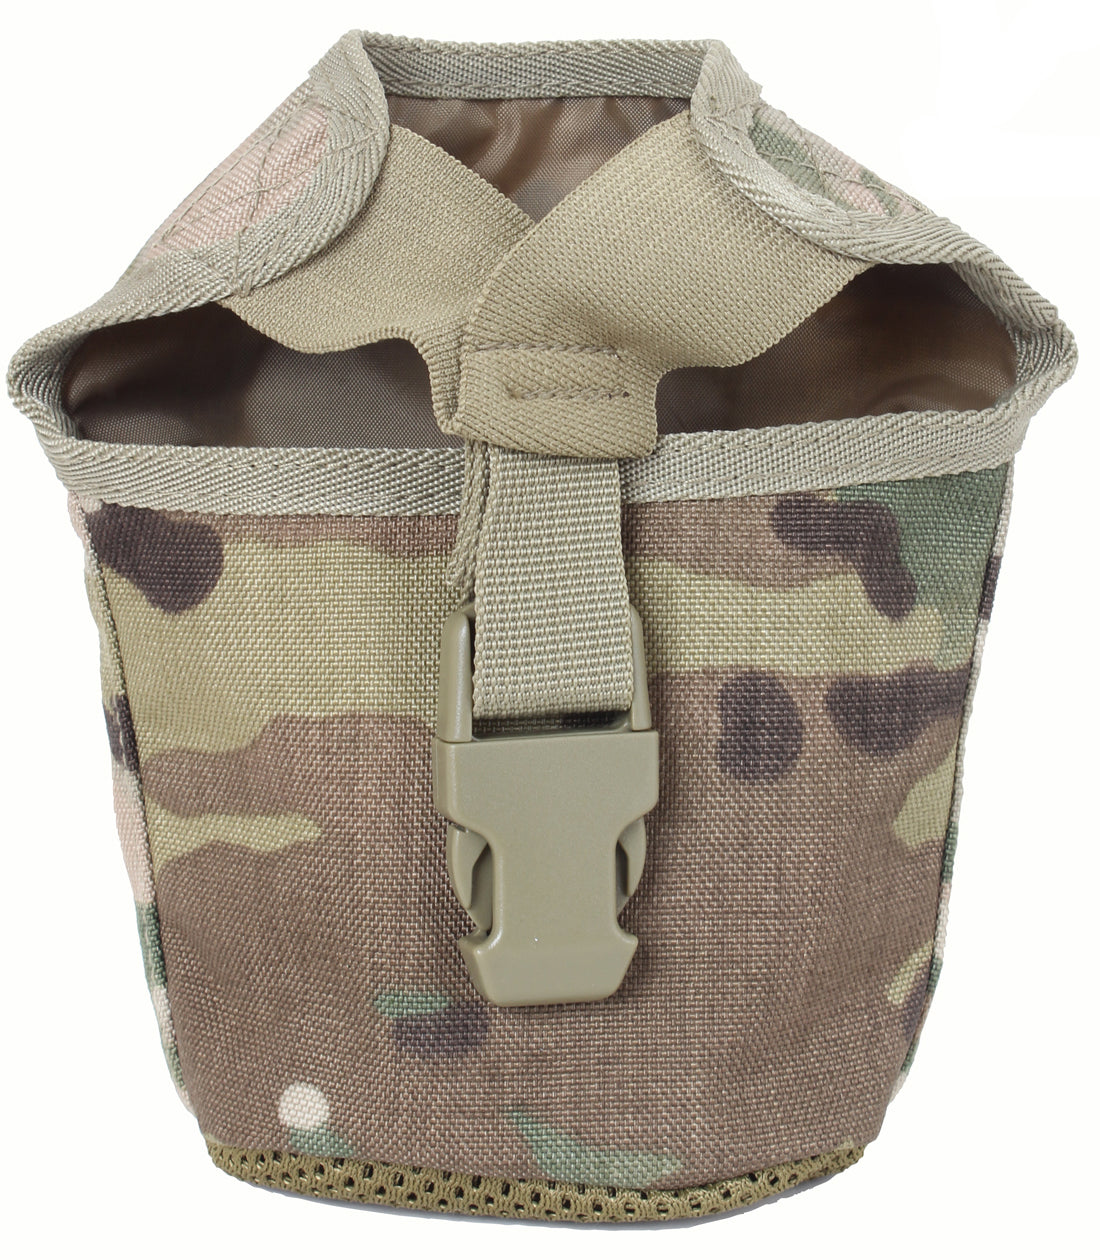 Rothco MOLLE Compatible 1 Quart Canteen Pouch Cover